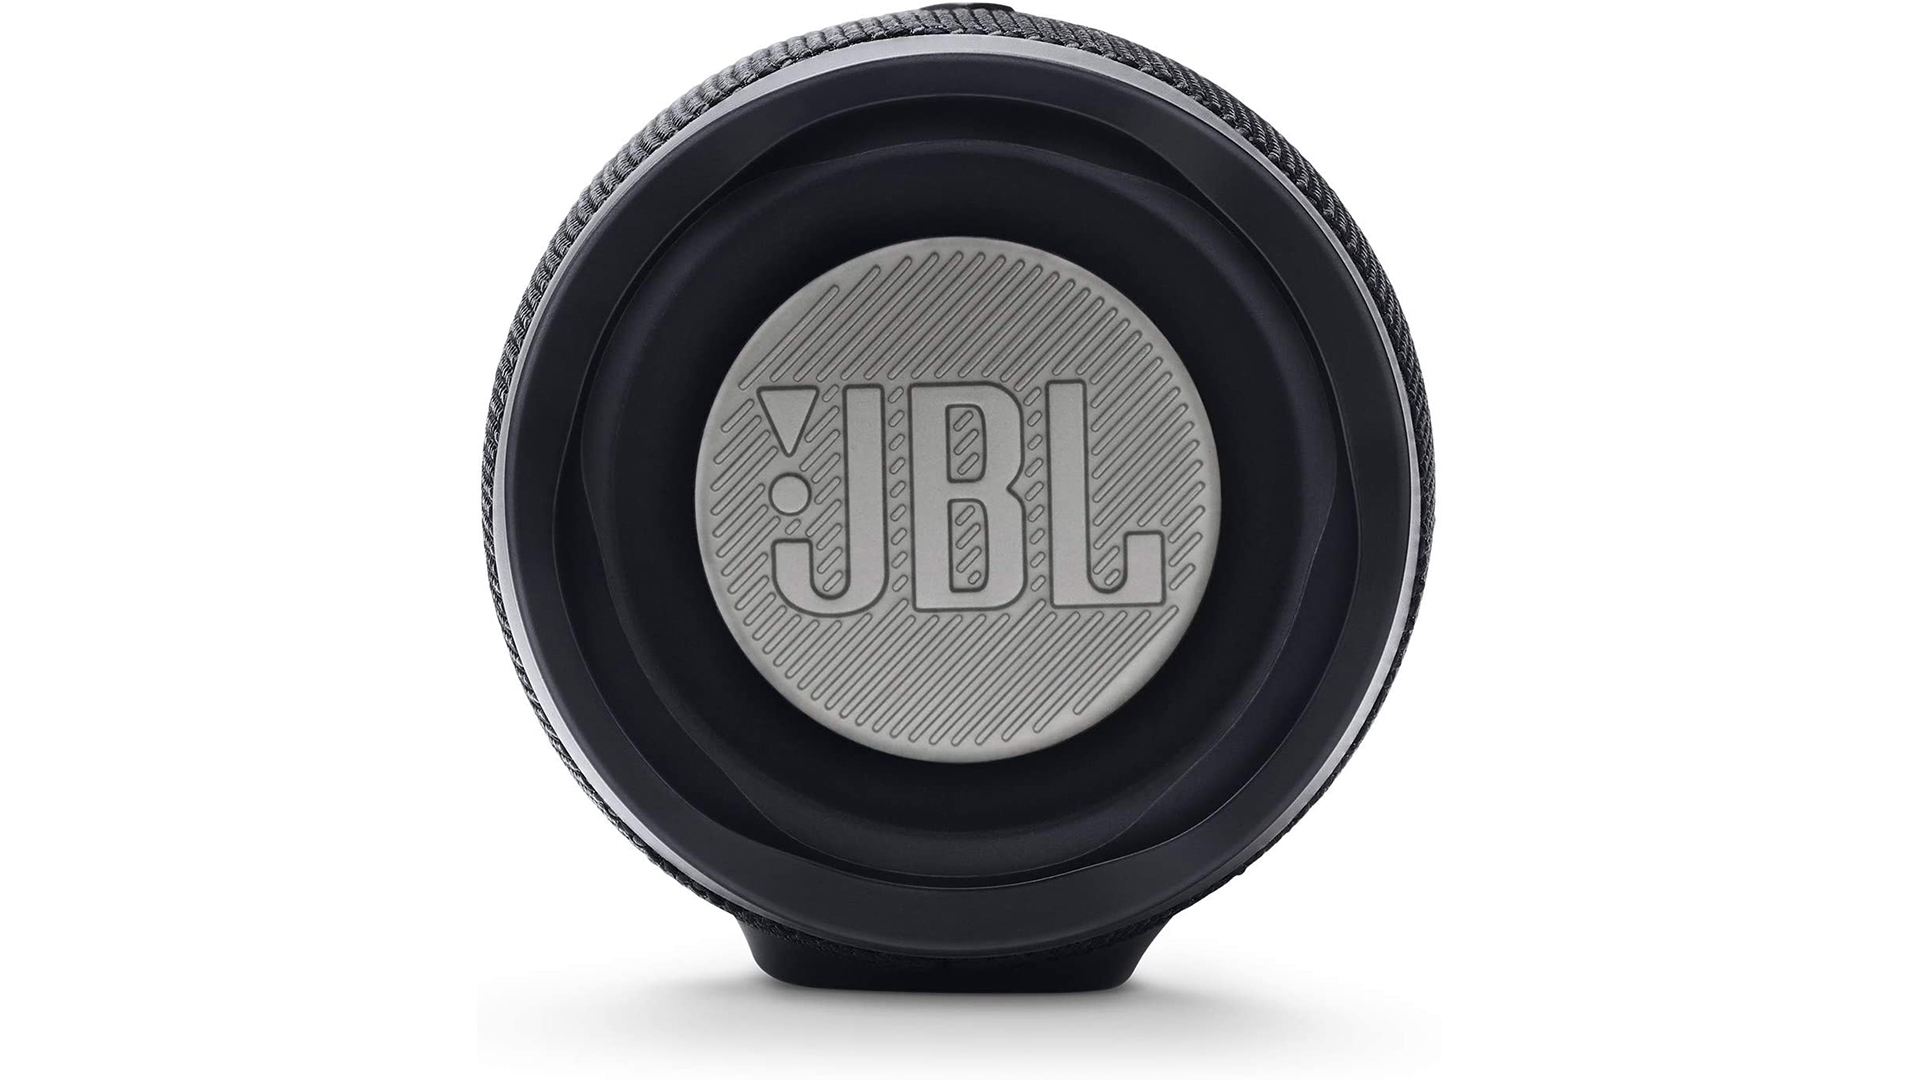 jbl charge 4 portable bluetooth speaker review